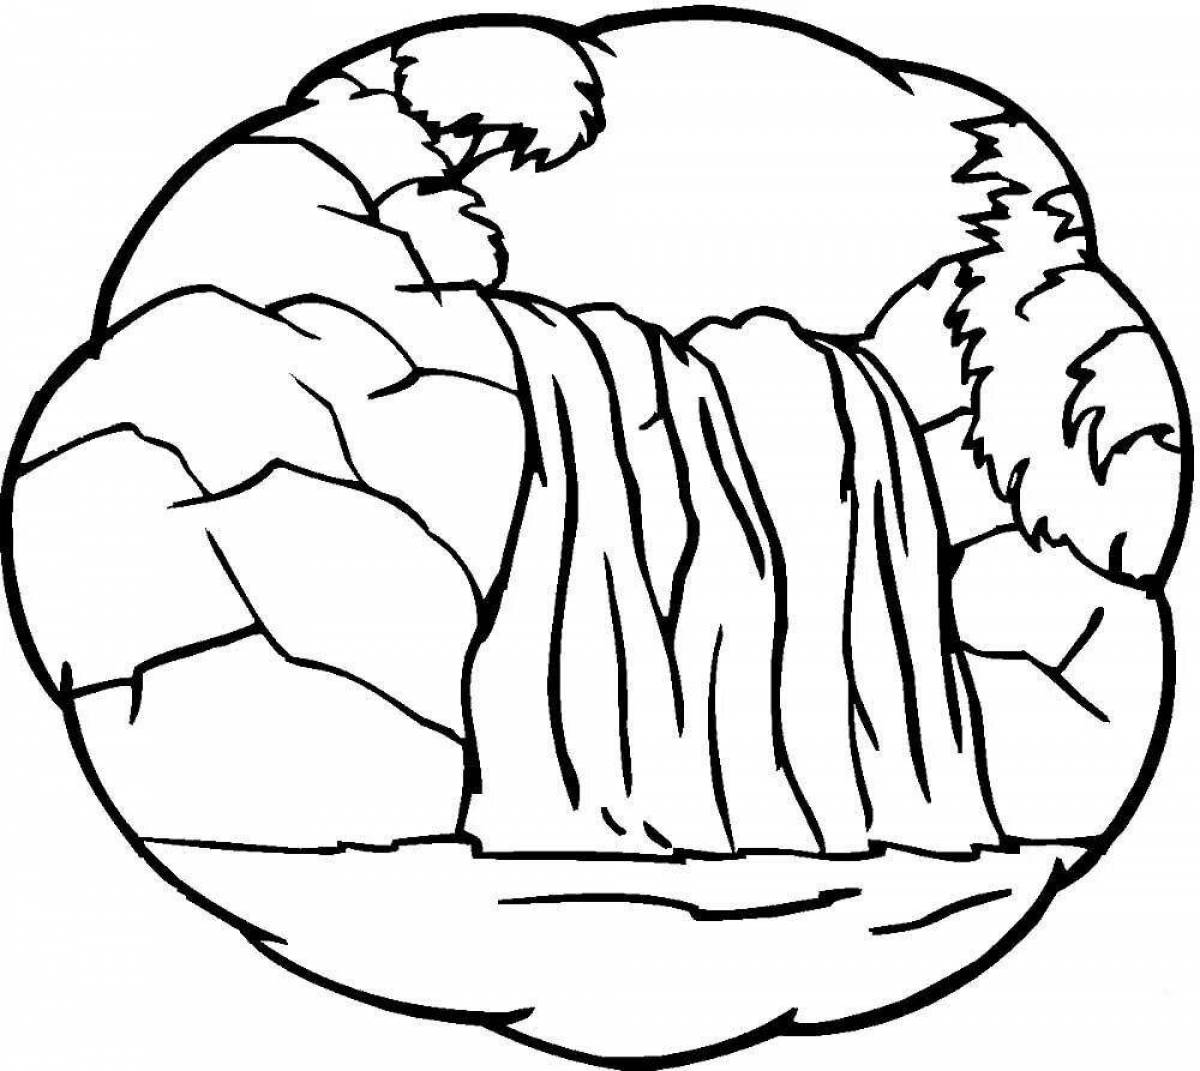 Amazing waterfall coloring page for kids